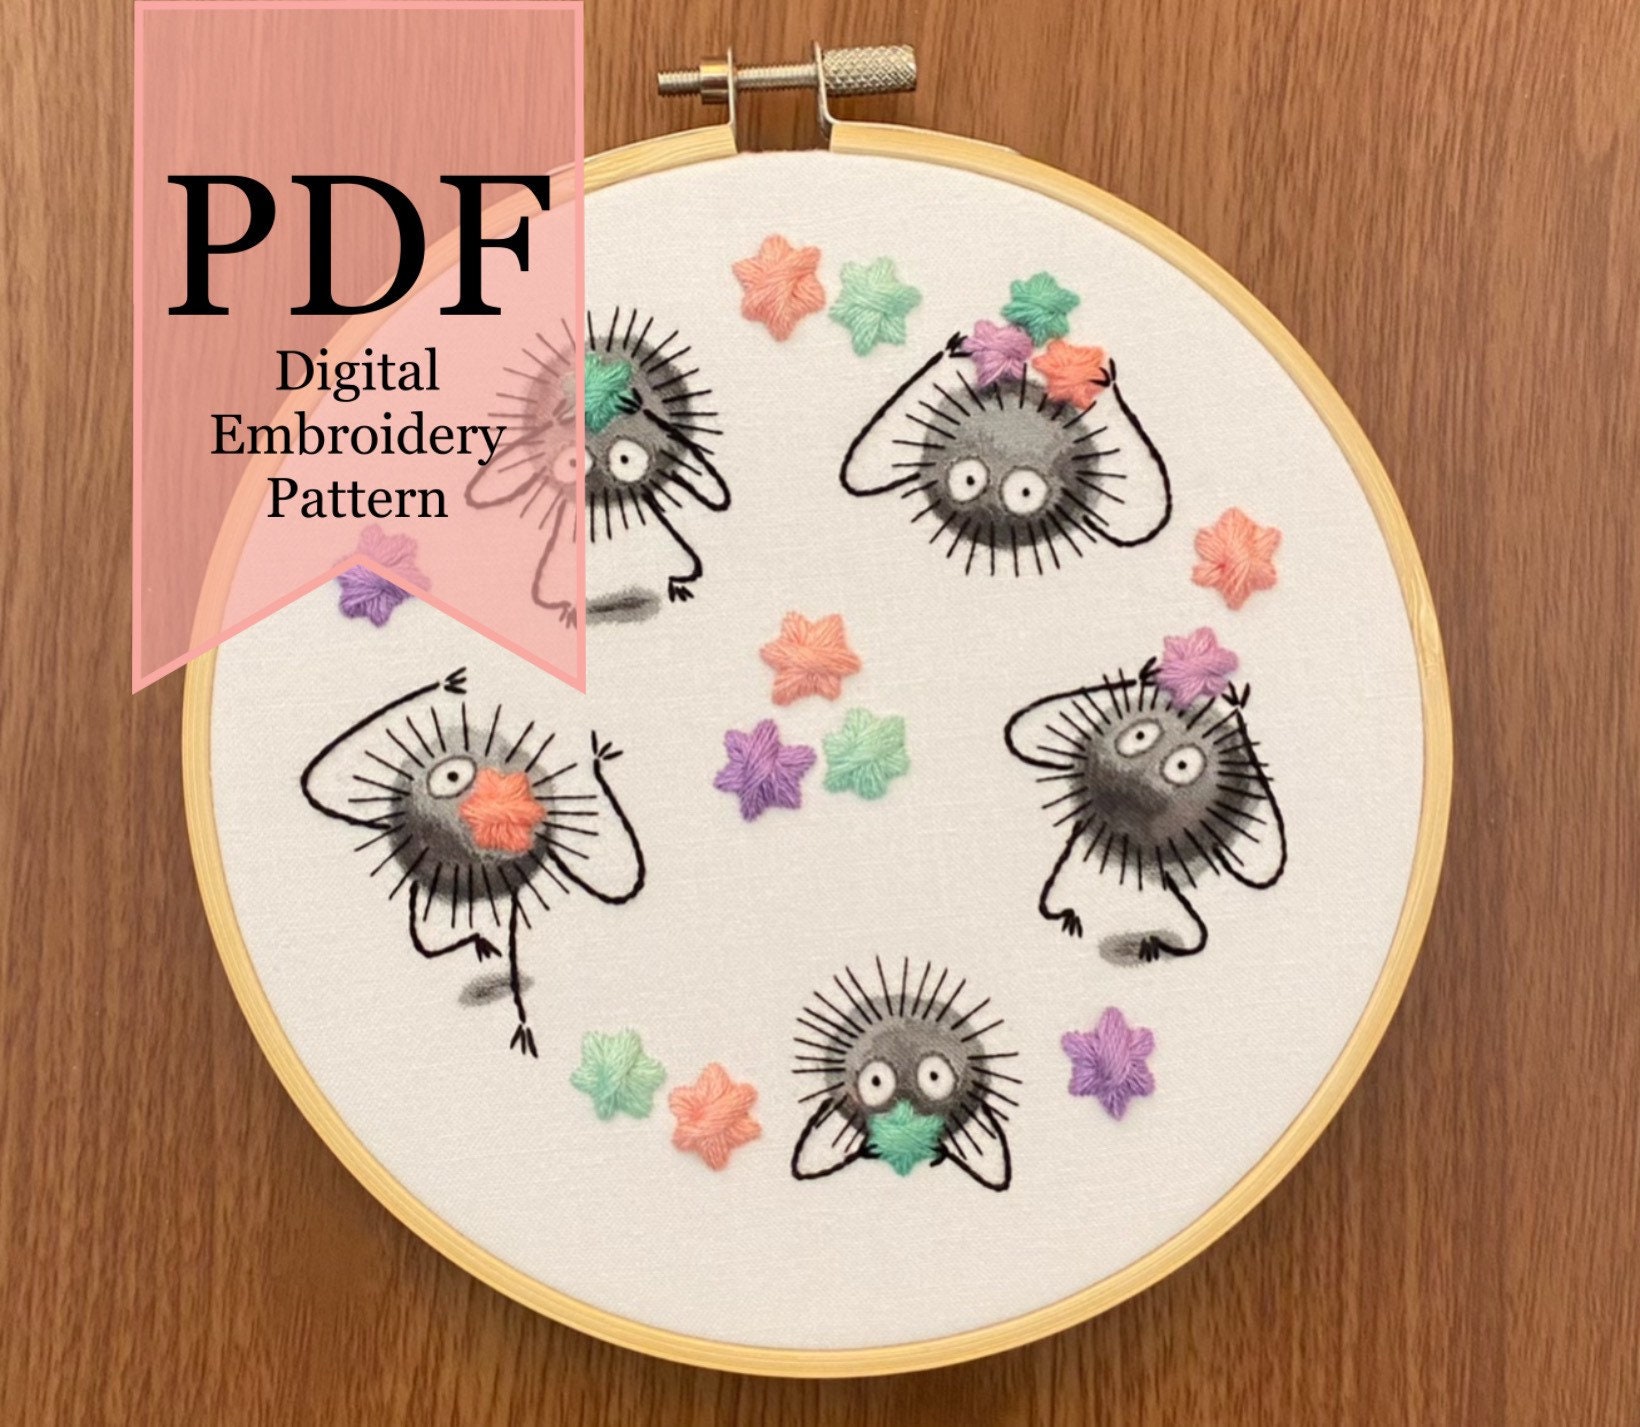 Susuwatari Soot Sprite Embroidery Hoop - jemibroidery's Ko-fi Shop - Ko-fi  ❤️ Where creators get support from fans through donations, memberships,  shop sales and more! The original 'Buy Me a Coffee' Page.